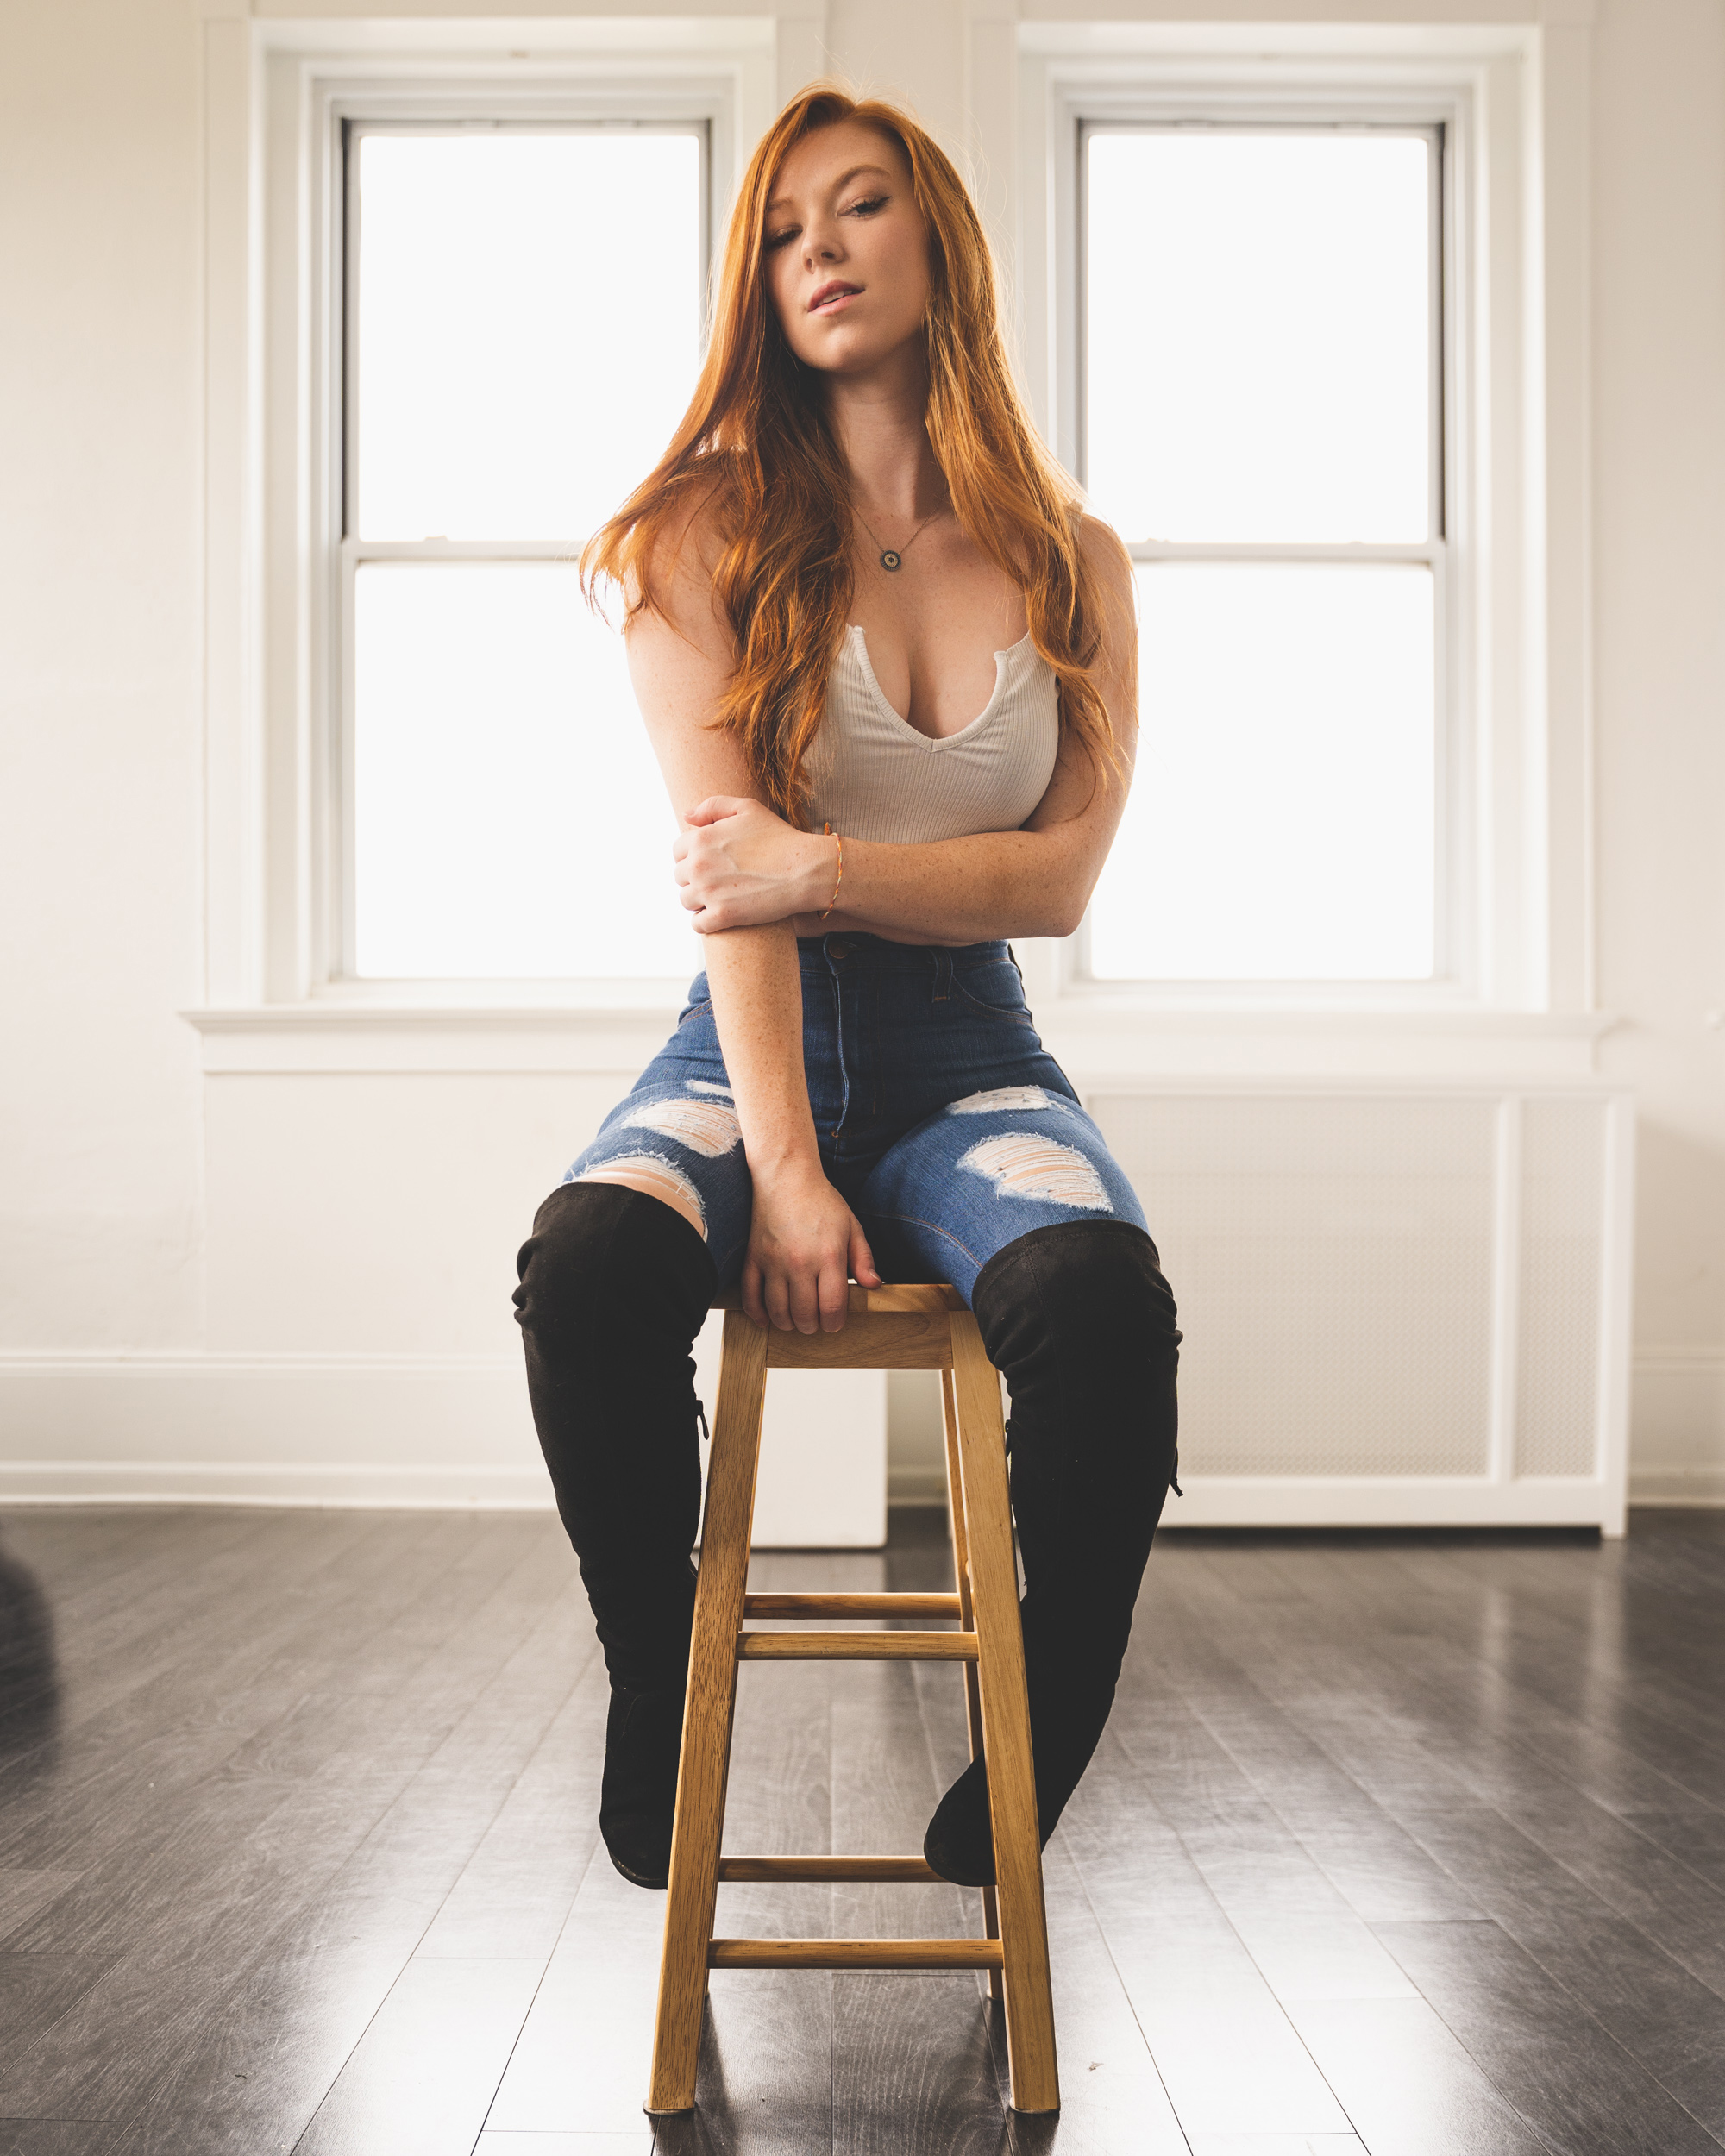 Women Model Redhead Looking At Viewer Parted Lips Necklace White Tops Jeans Torn Jeans Knee High Boo 2000x2500